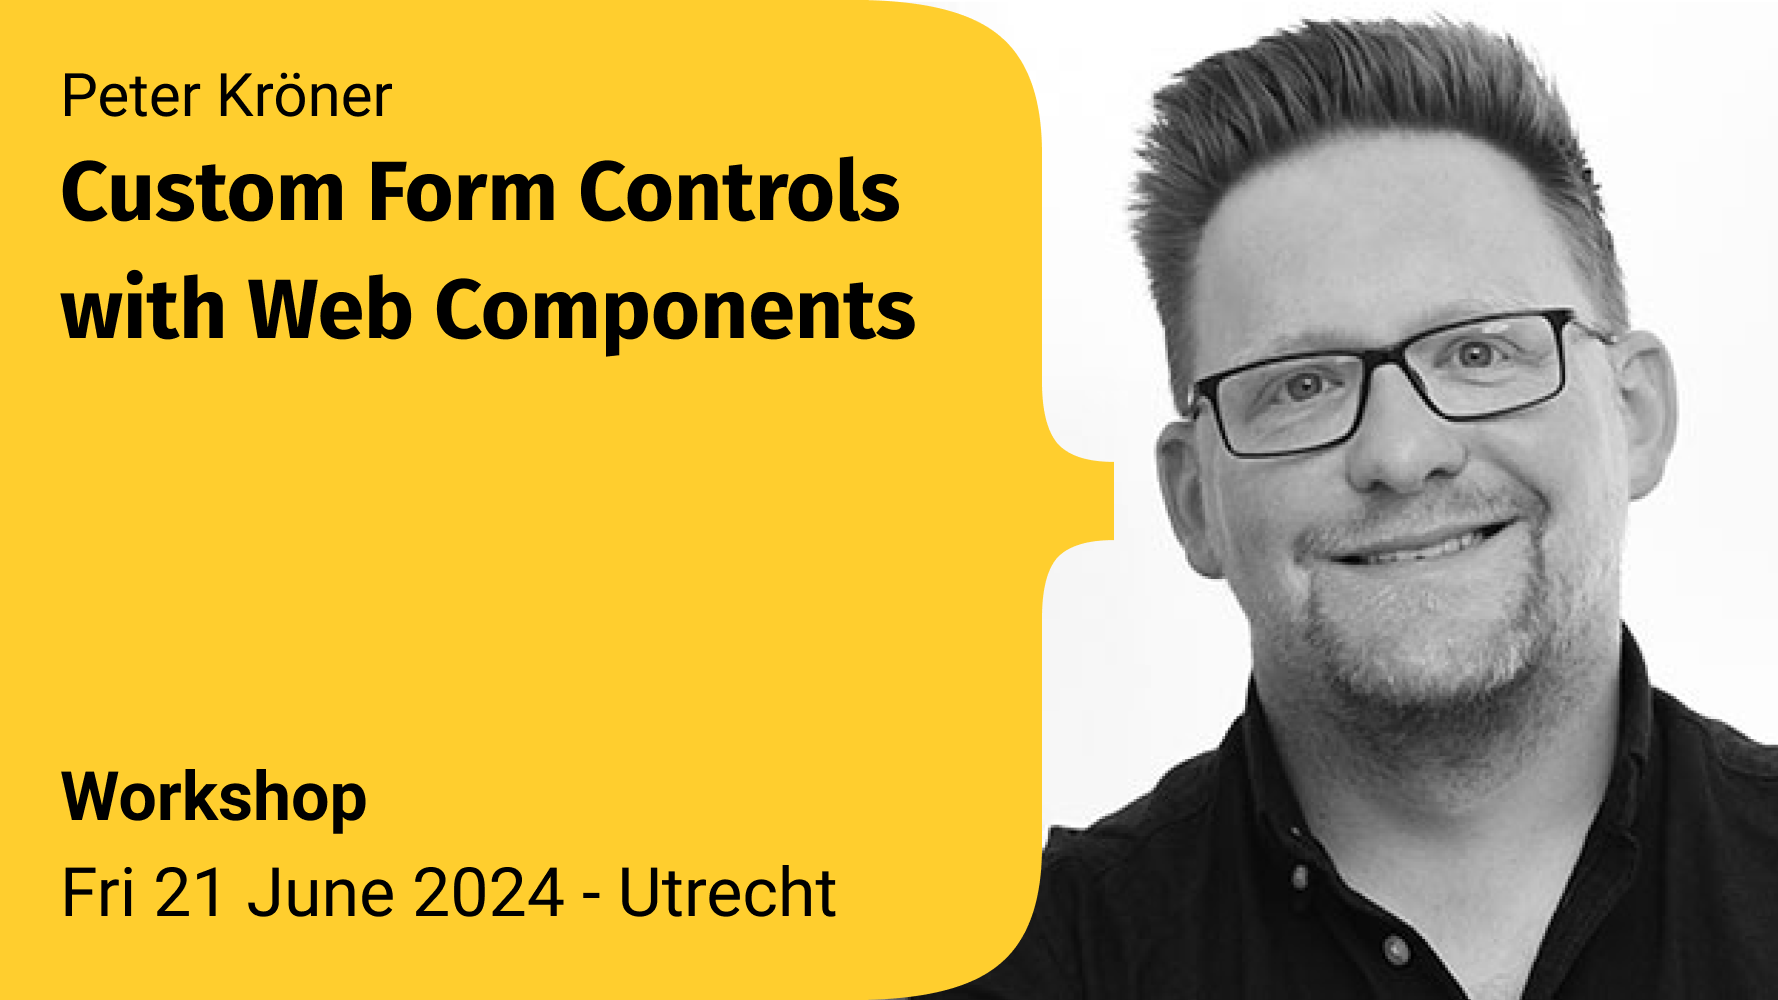 Workshop on June Friday 21st in Utrecht: Custom Form Controls with Web Components by Peter Kröner